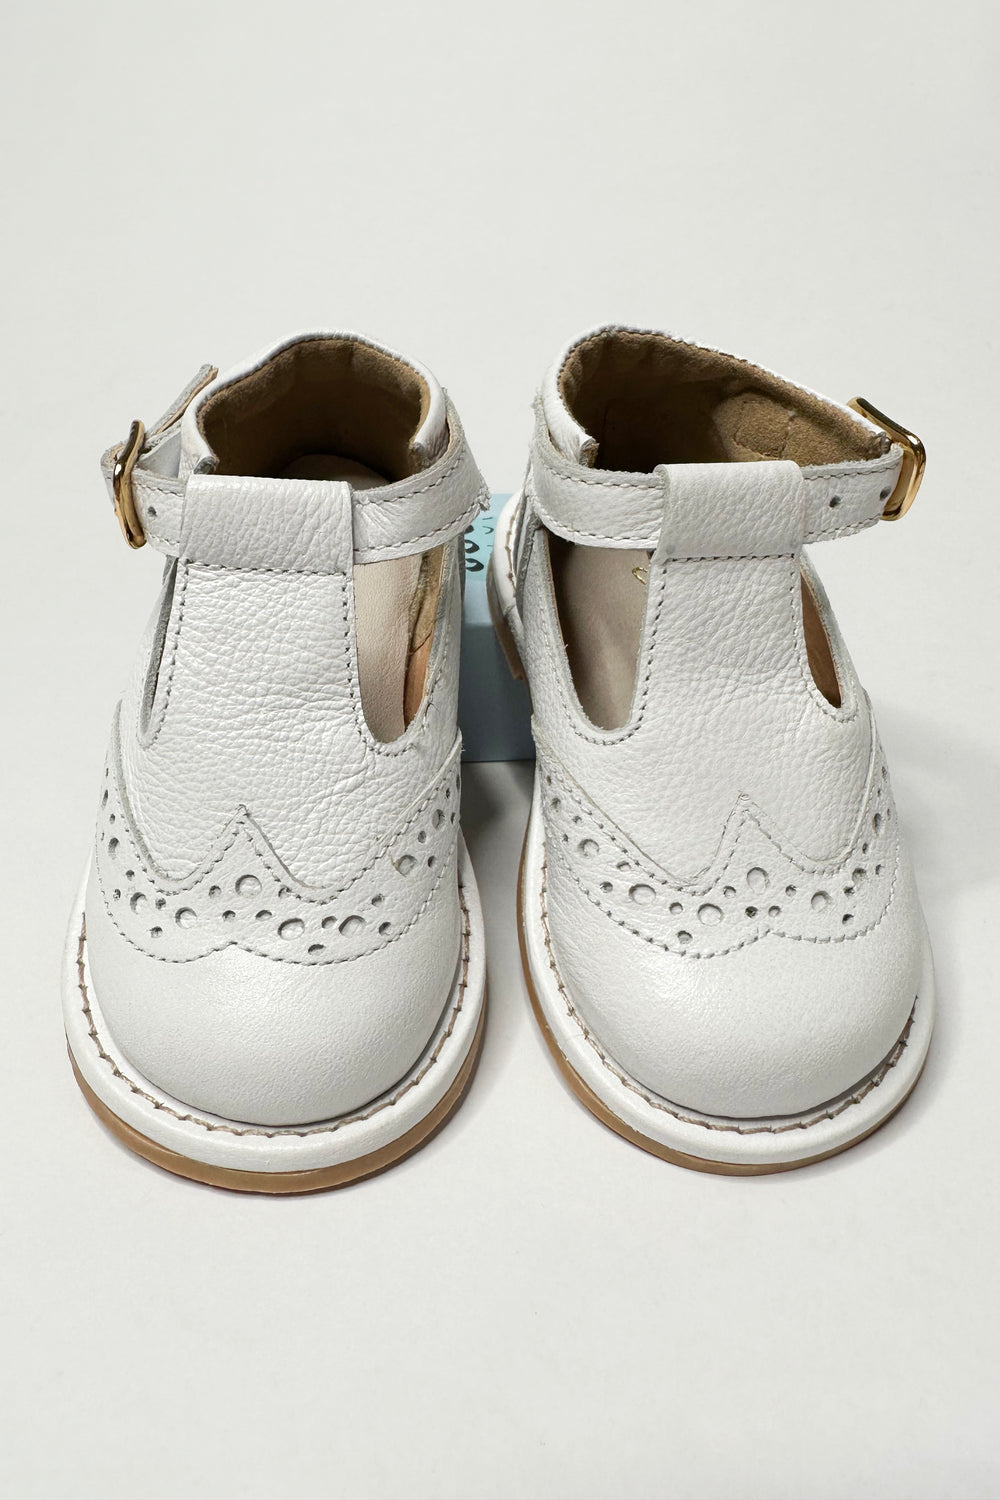 Ananás Petit "Woody" White Leather Shoes | iphoneandroidapplications